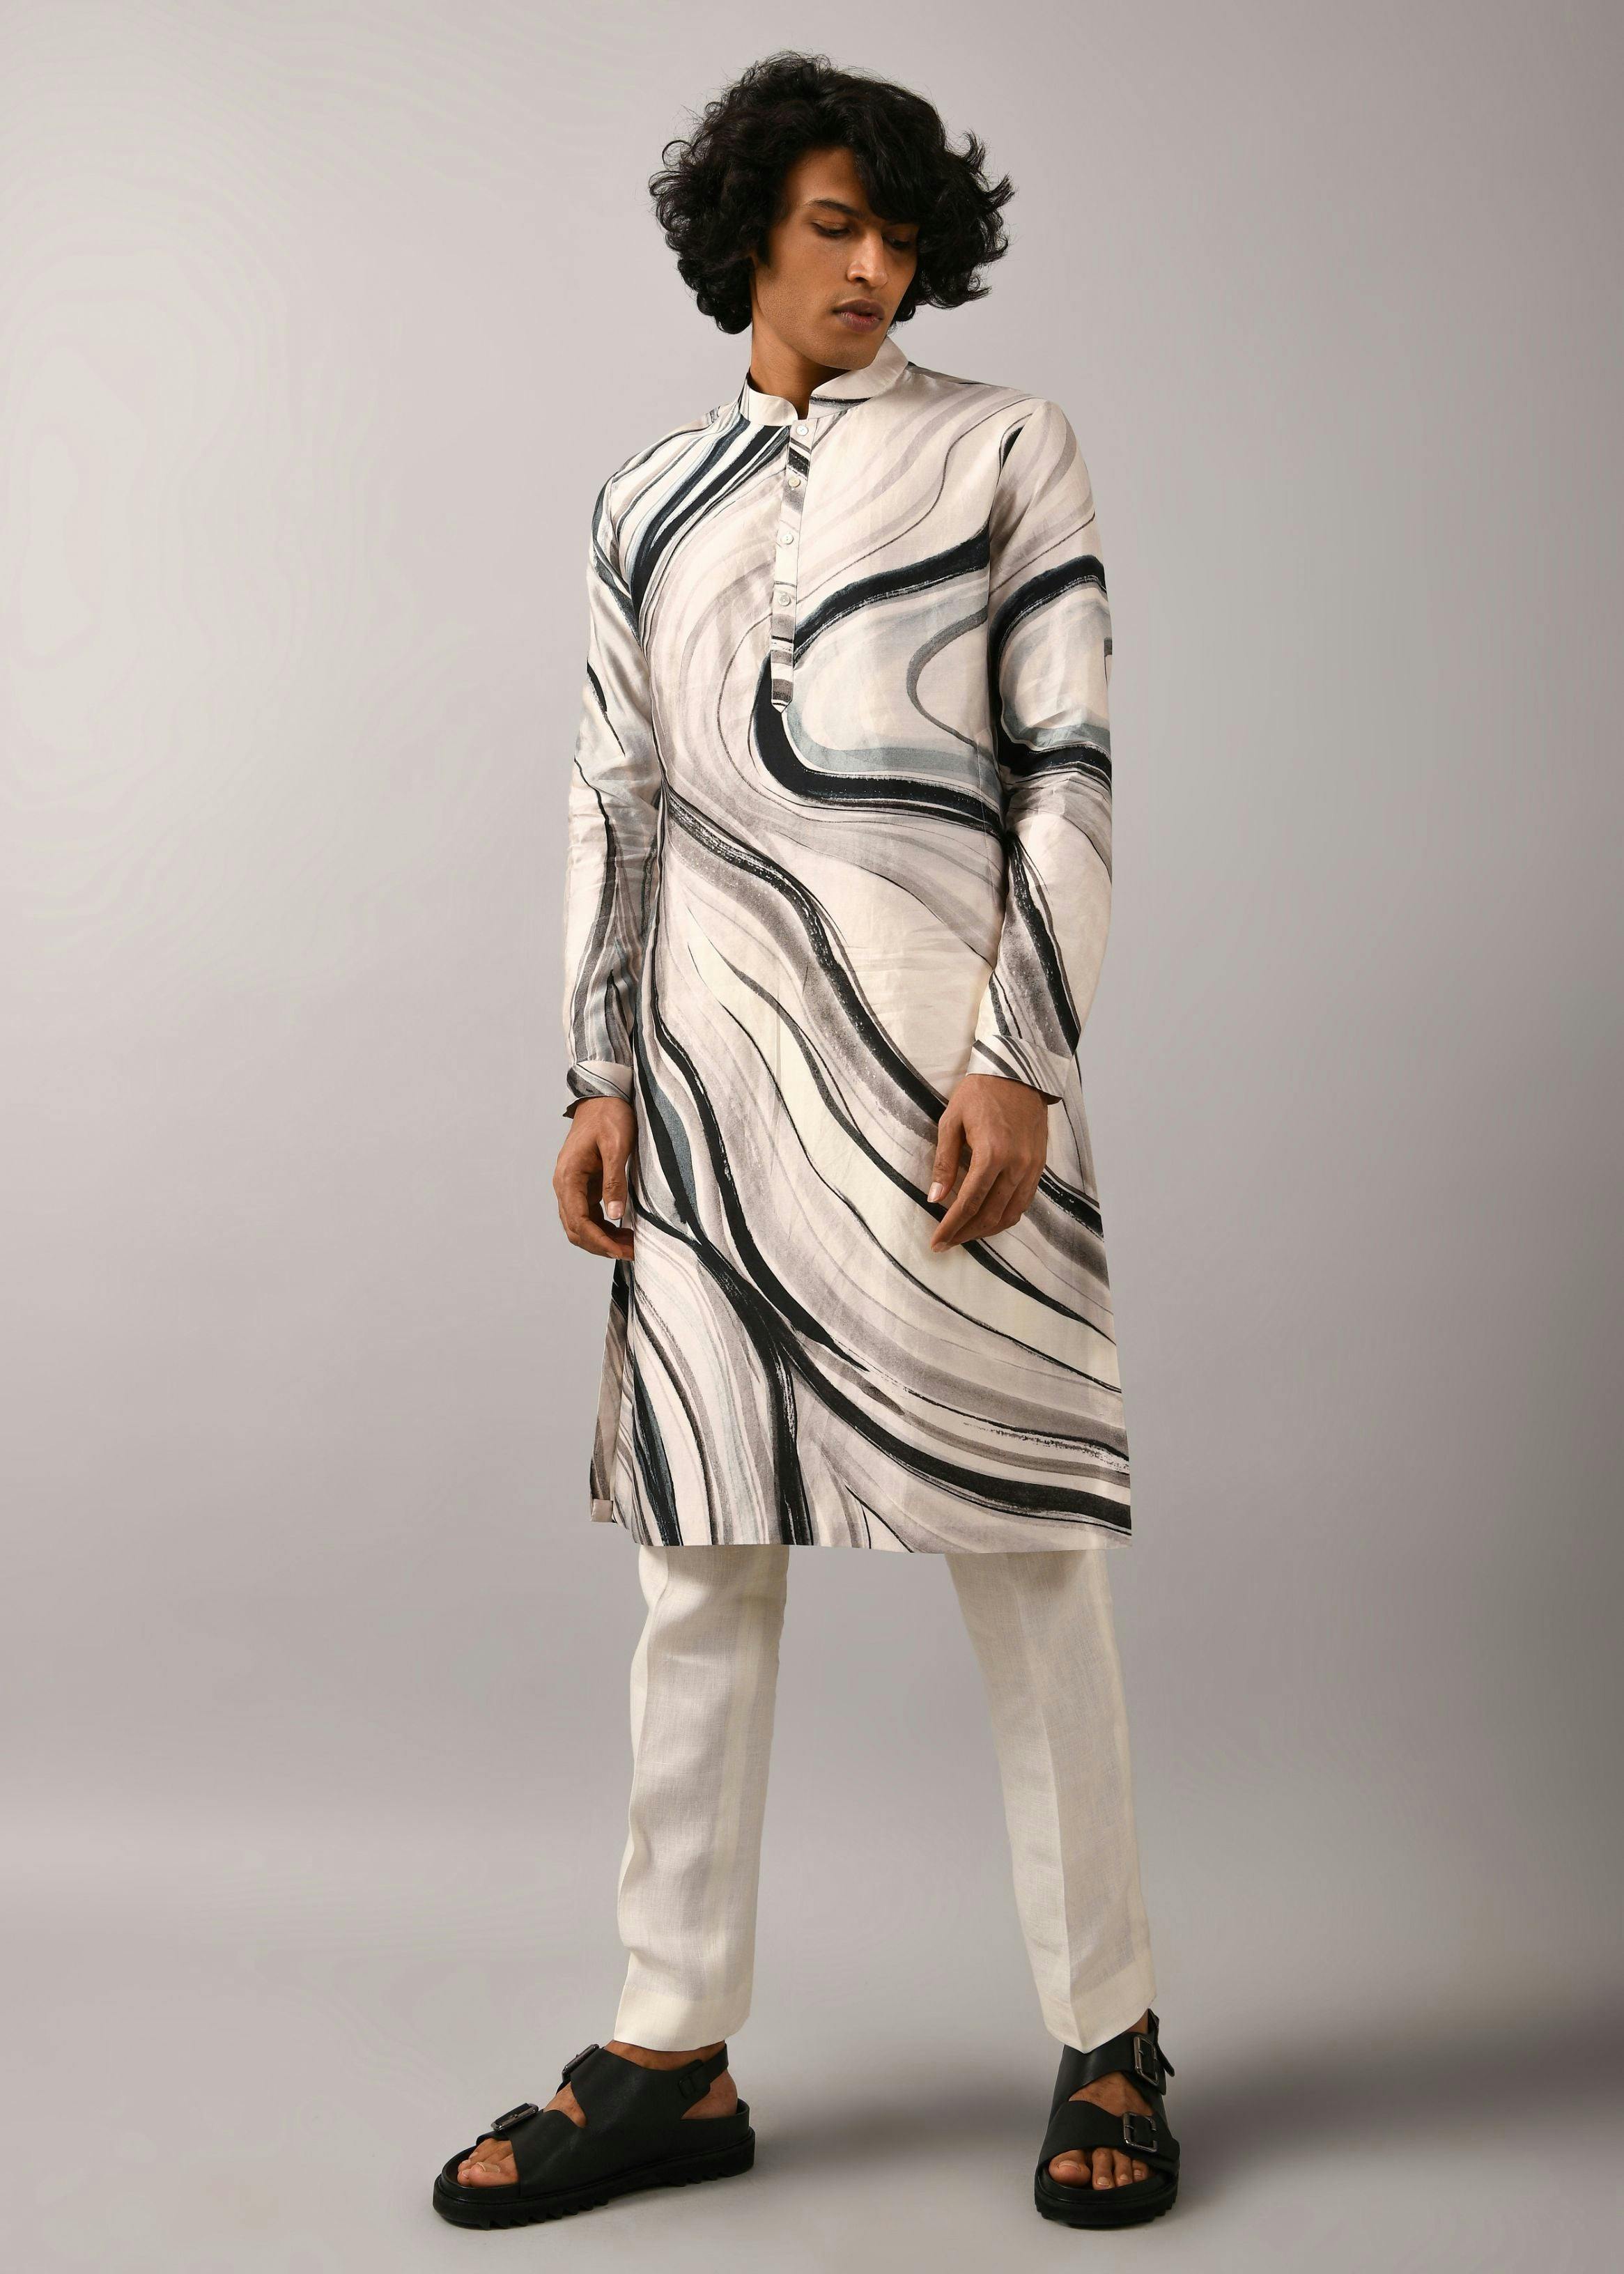 Airborne Strokes Kurta, a product by Country Made